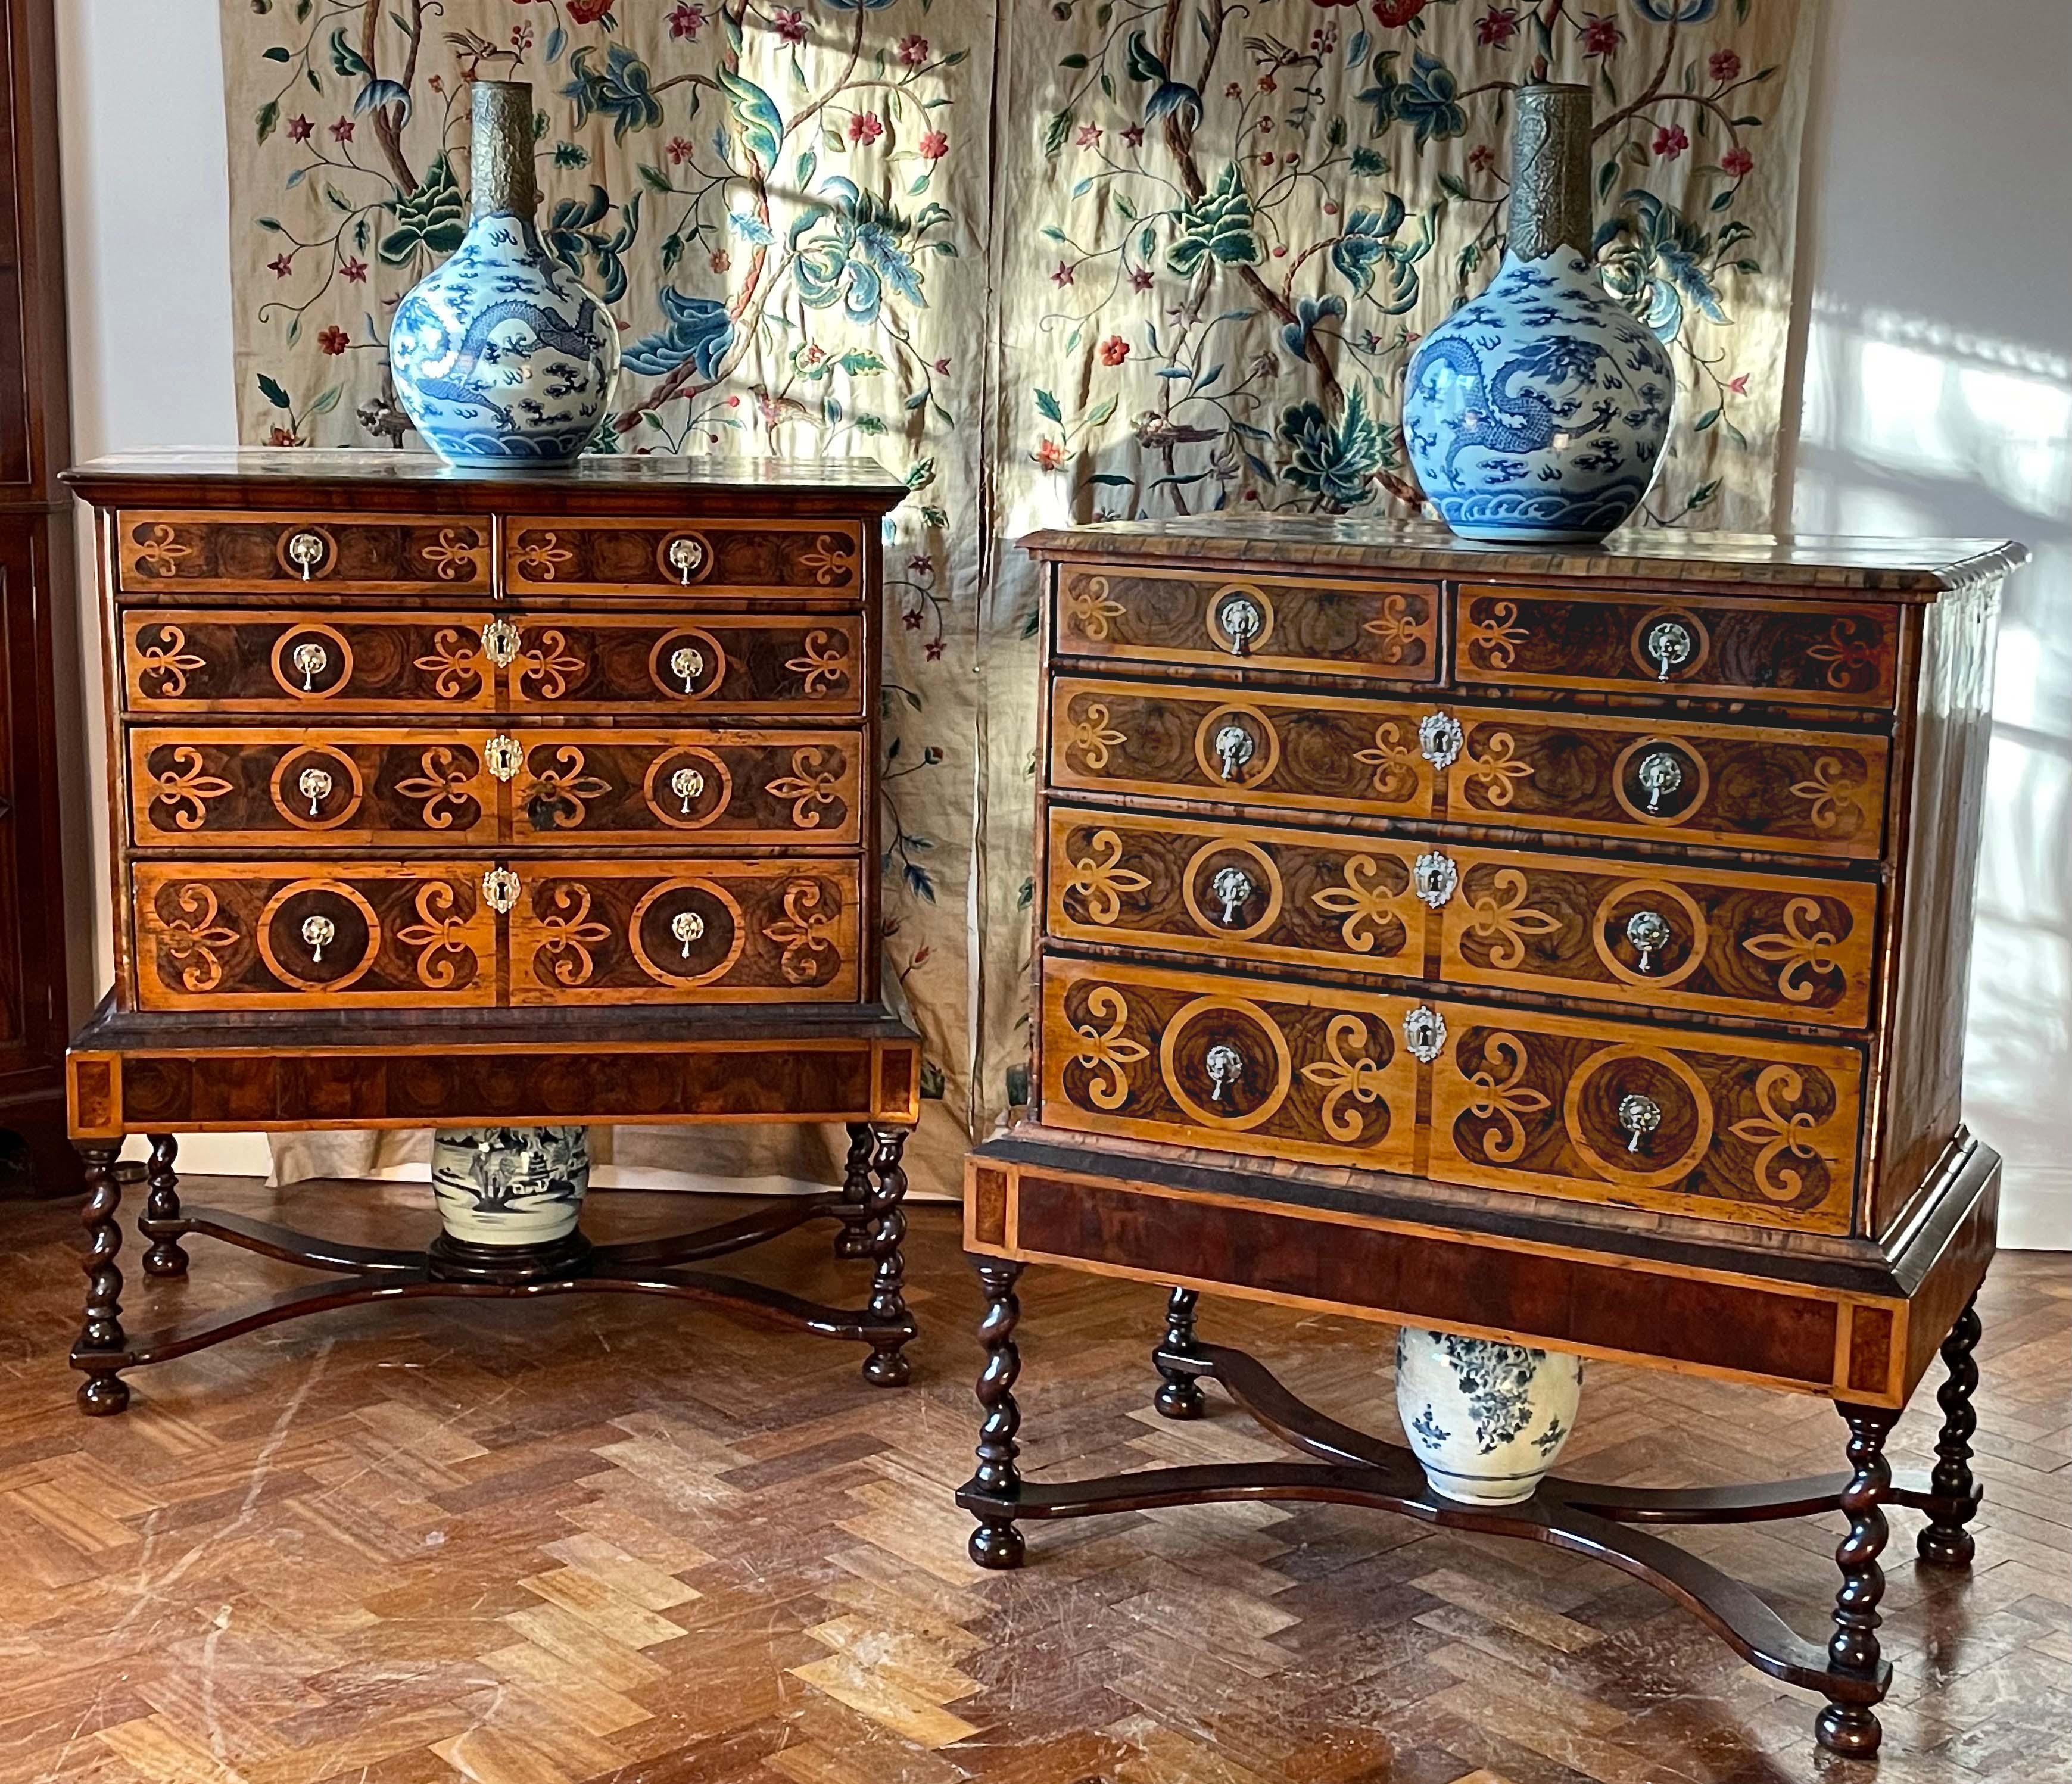 A fine, and rare, very closely-matched pair of late-17th century oyster walnut chests on stands. 
English, Charles II period, ca 1685.

Both with fleur-de-lys inlays bordered by holly bands. 
Superb colour and old patina throughout.
Stands restored.